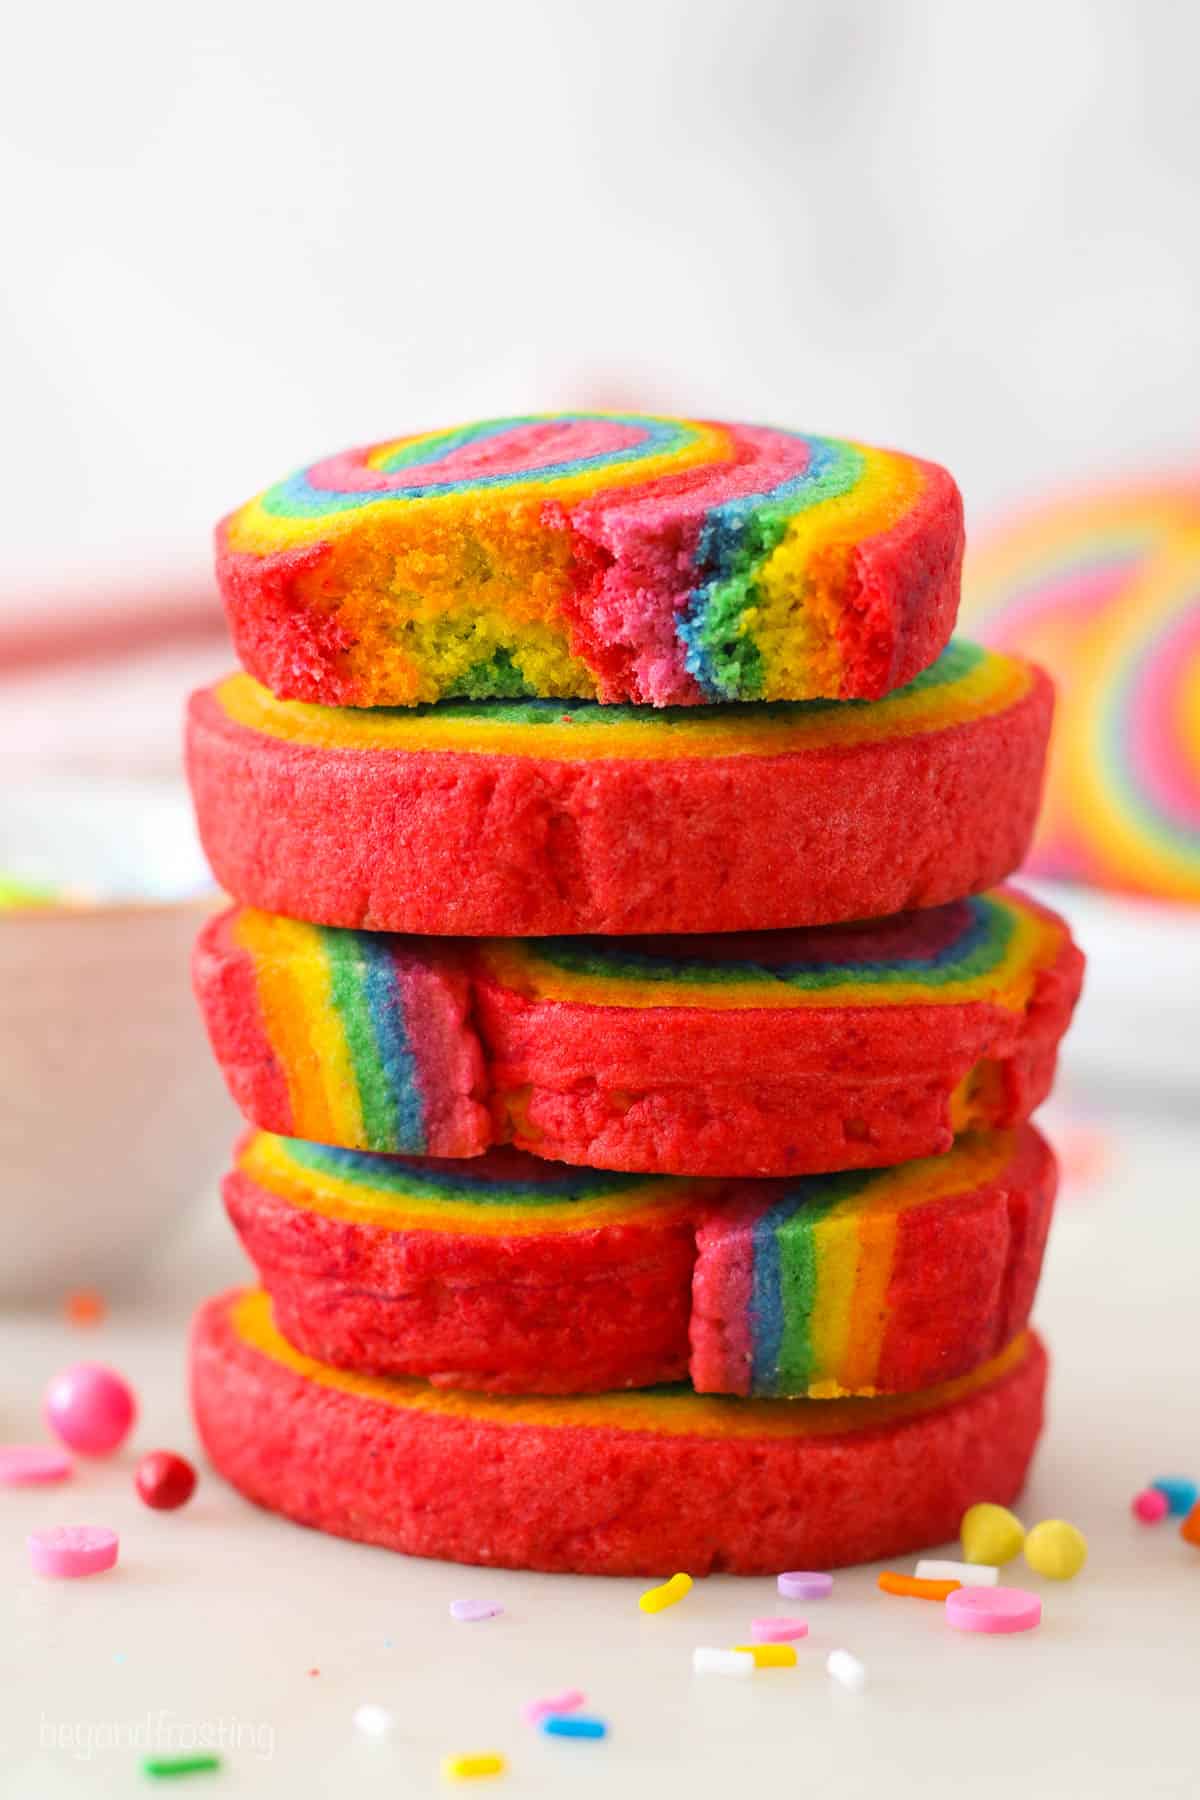 A stack of rainbow cookies with a bite missing from the top cookie.